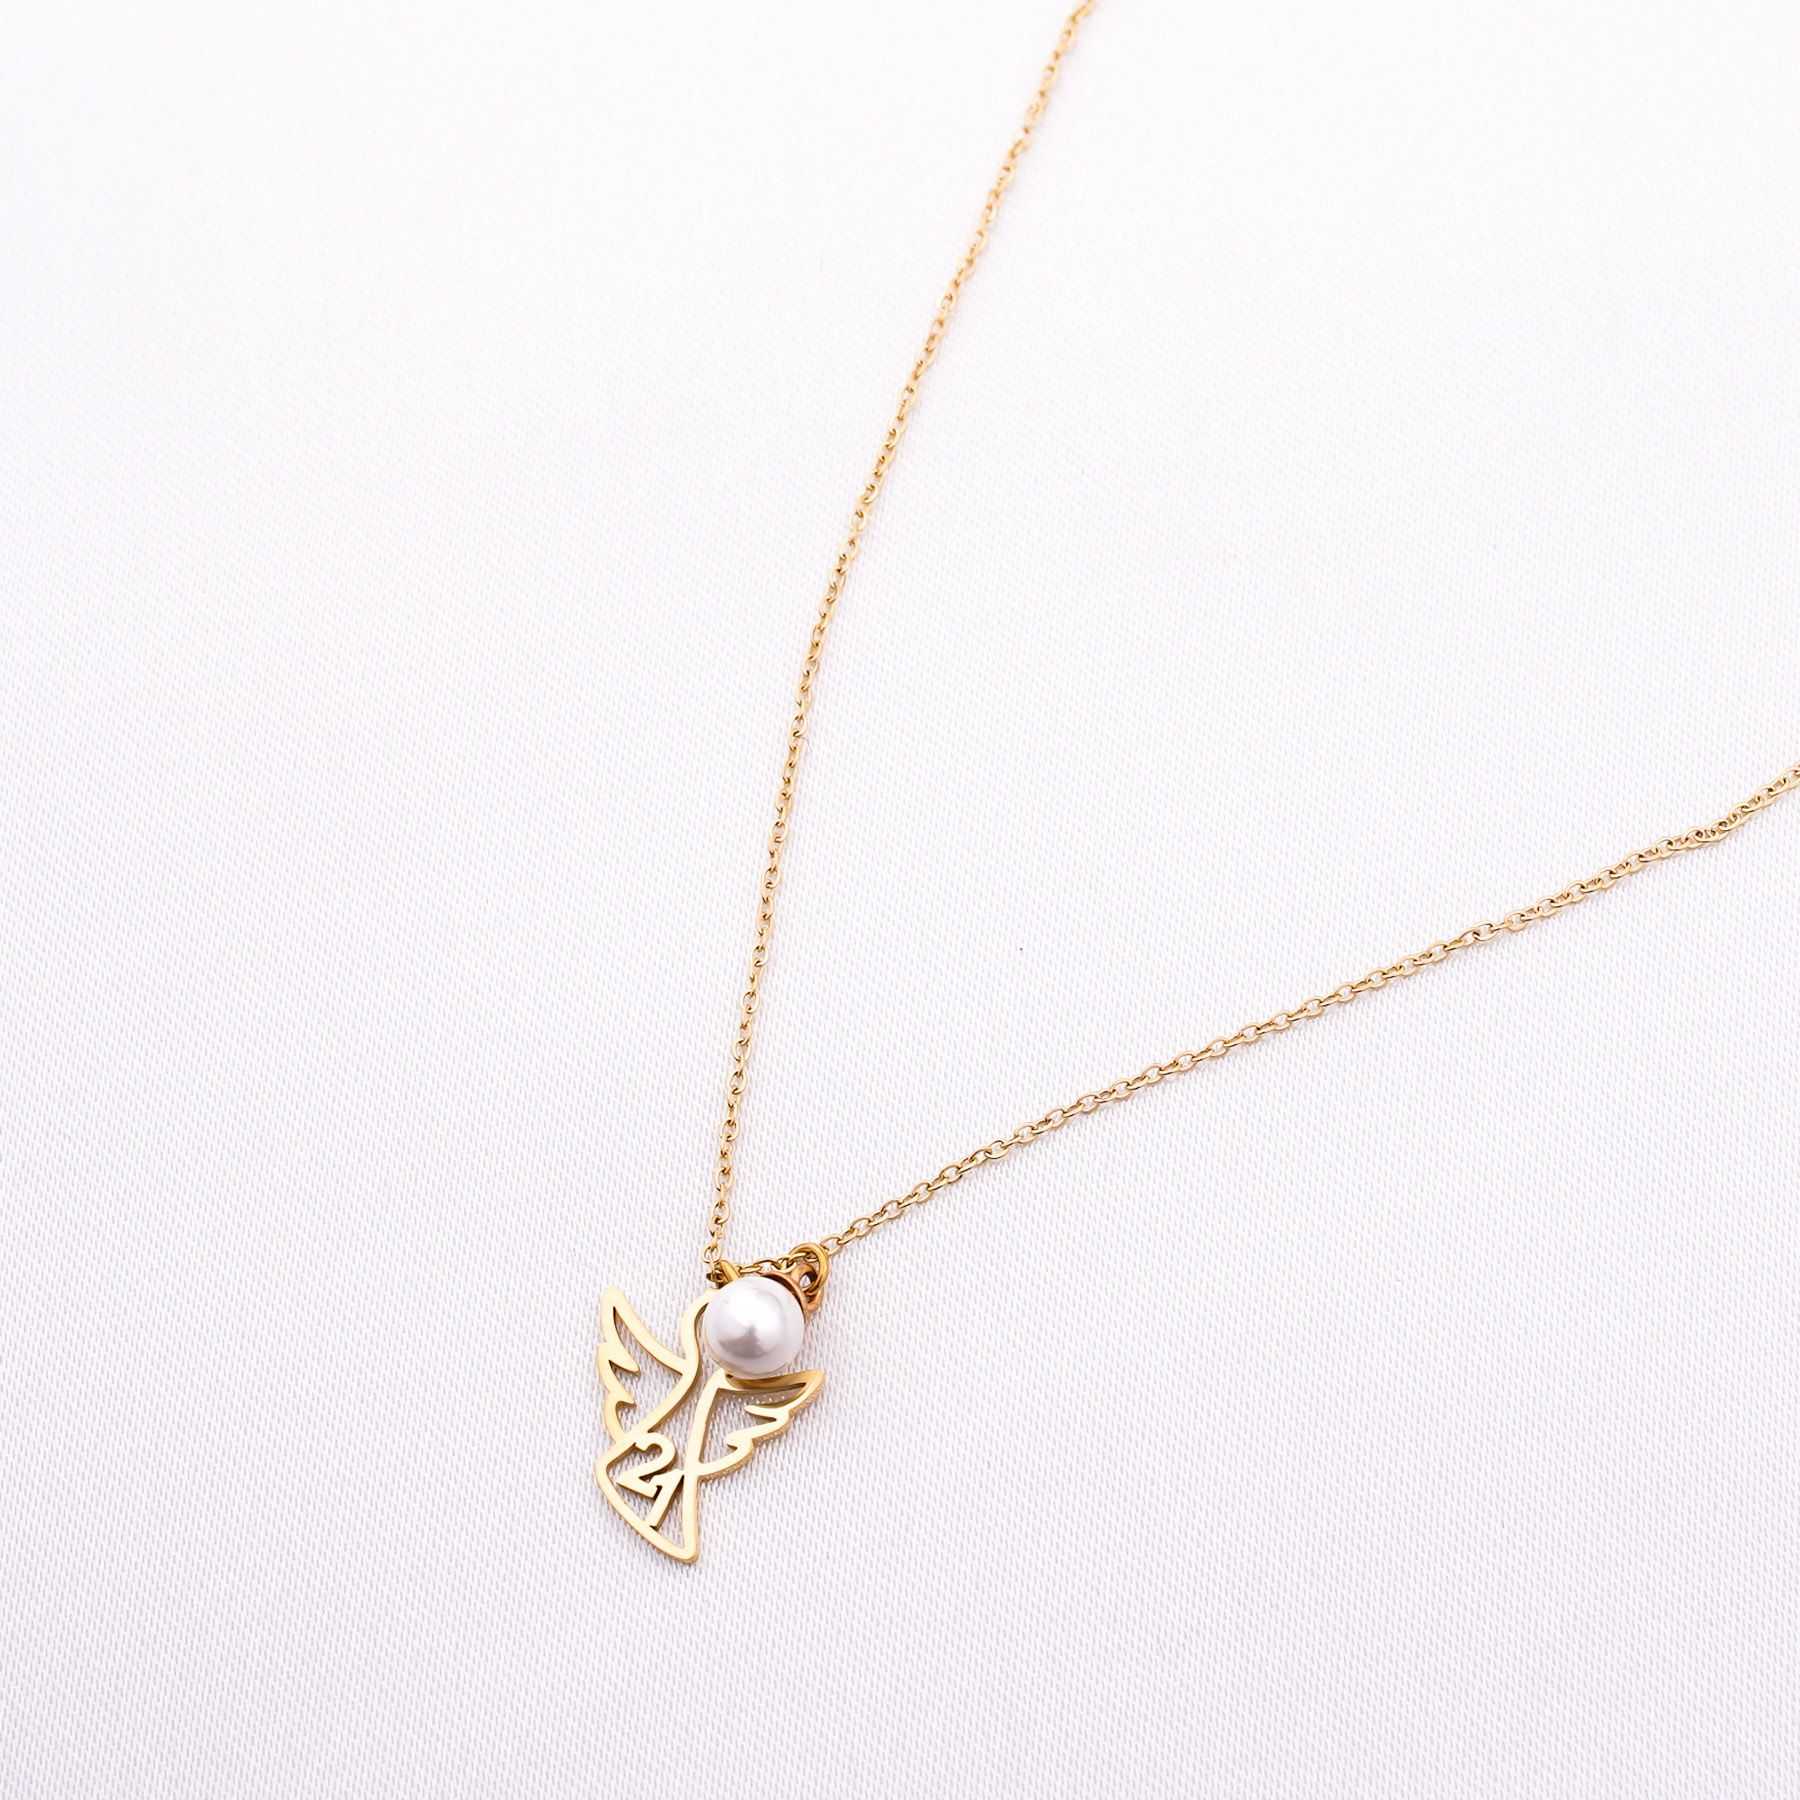 LUCKY DAY NECKLACE - GOLD